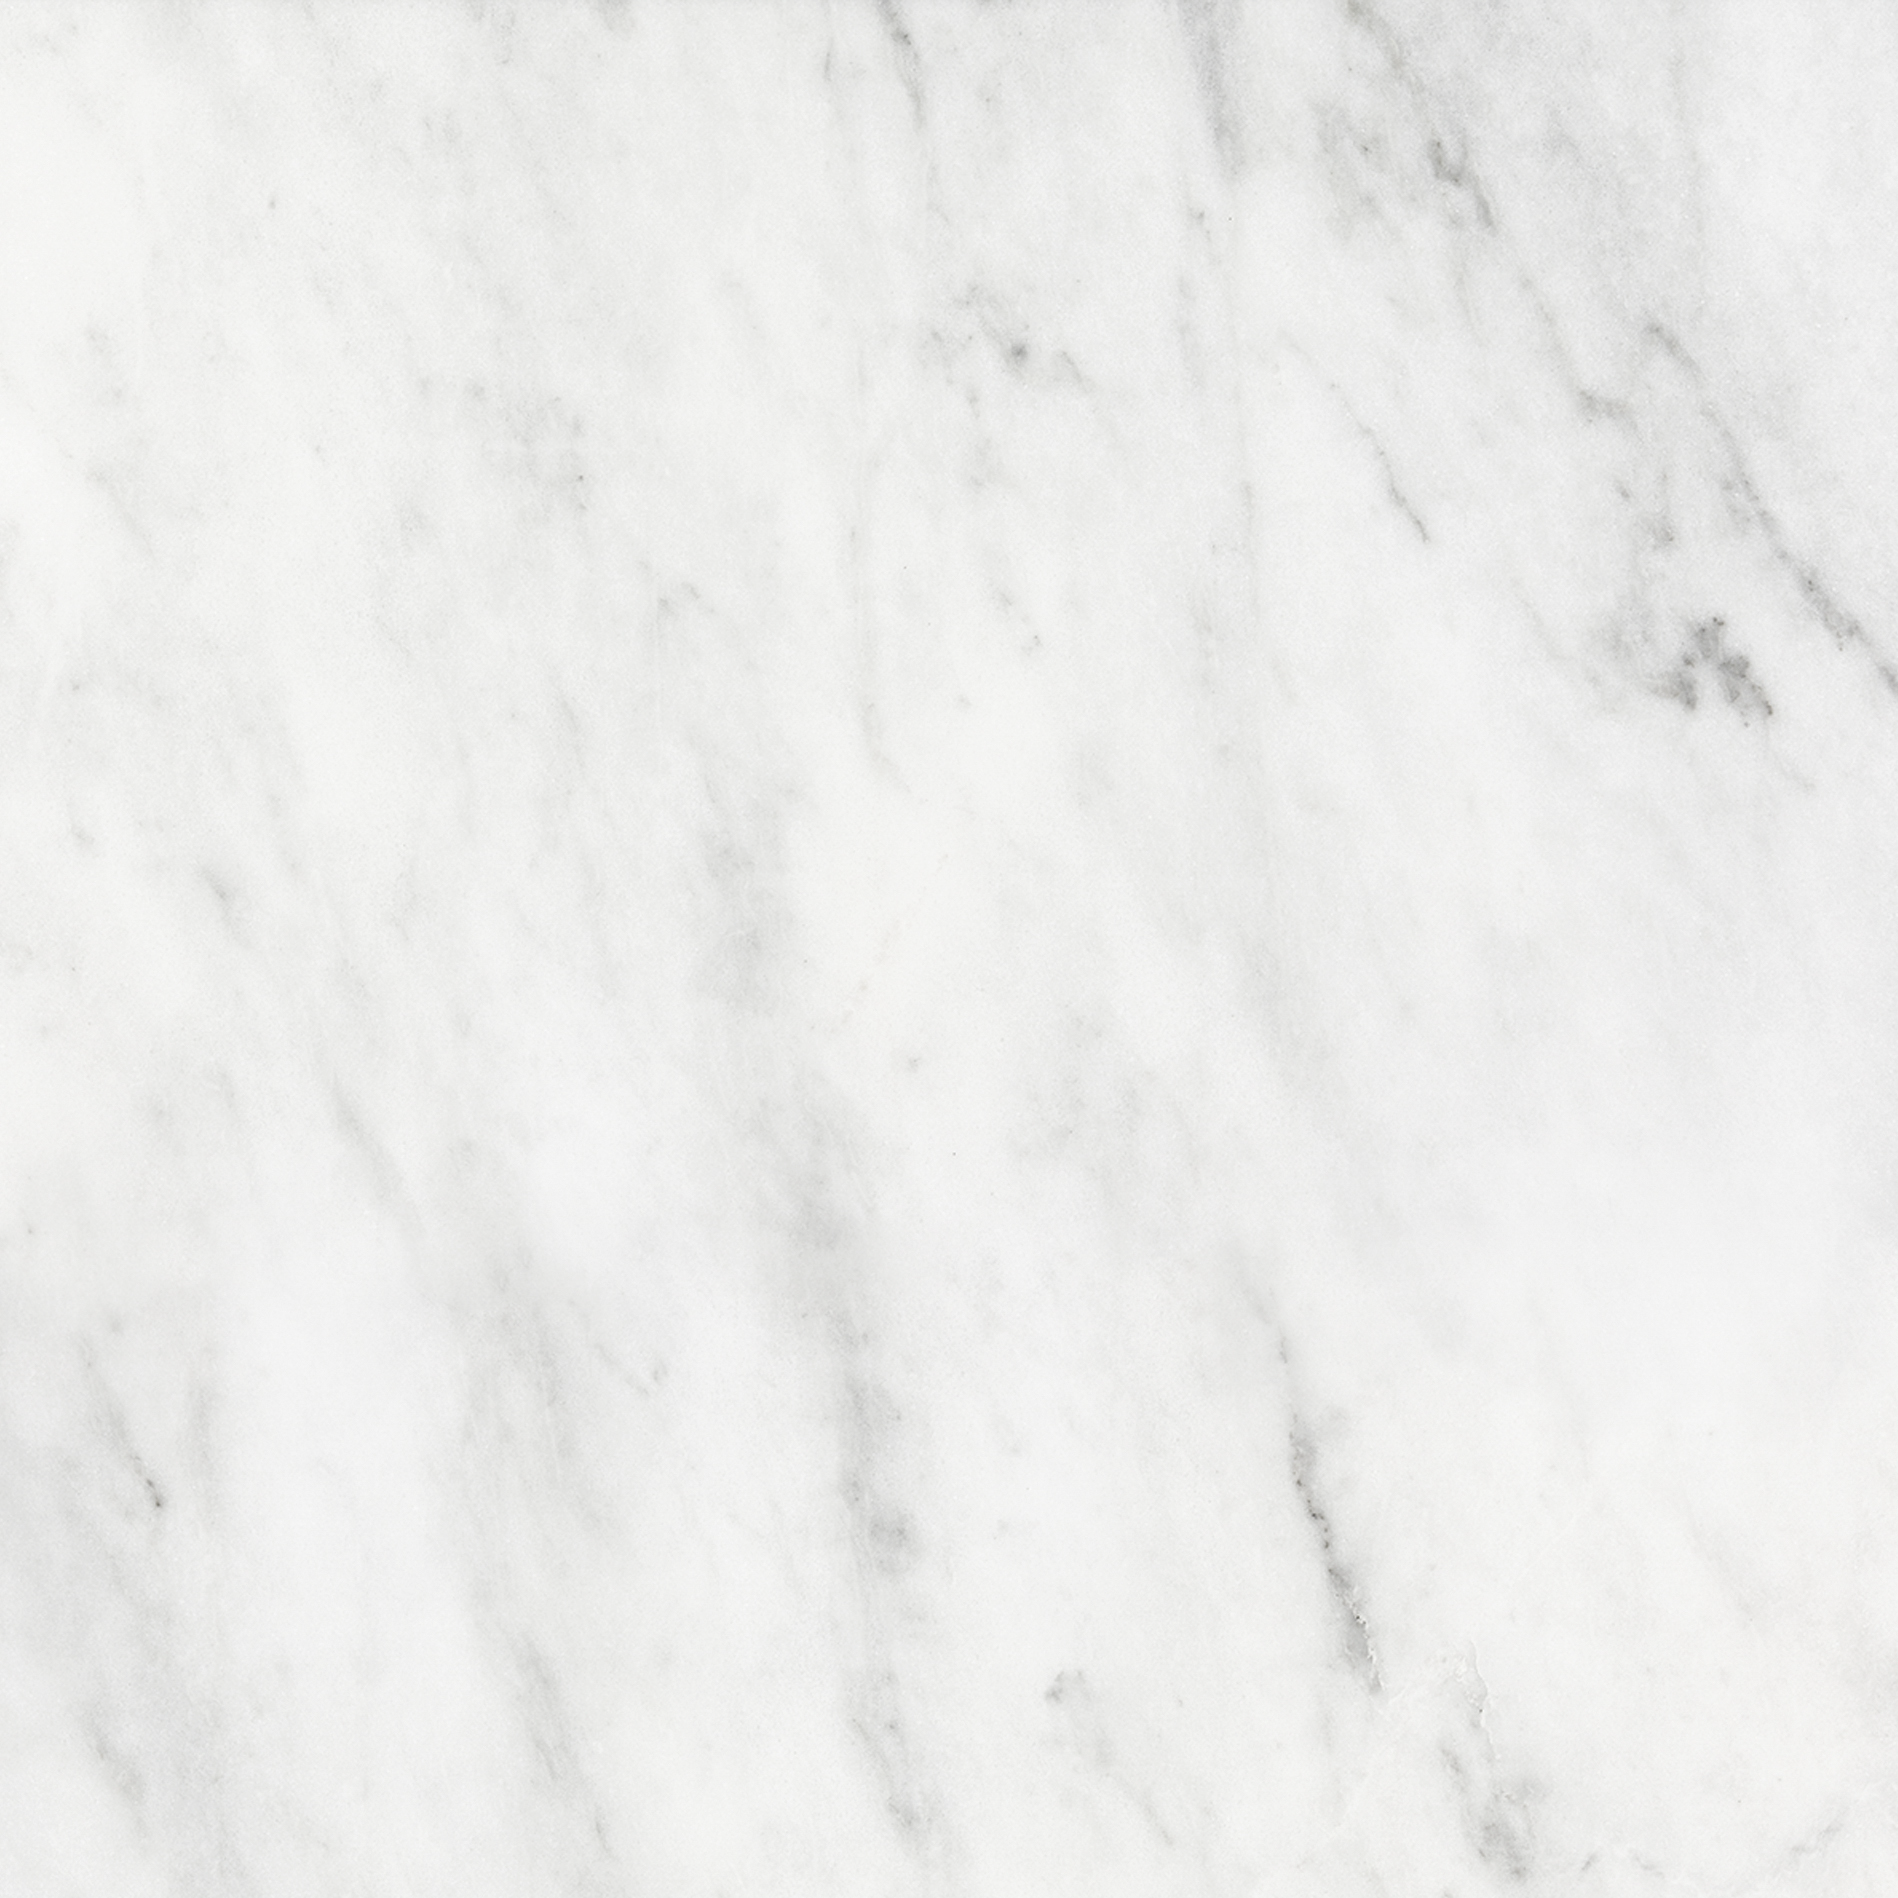 marble pattern natural stone field tile from bianco venatino anatolia collection distributed by surface group international polished finish micro beveled edge 18x18 square shape